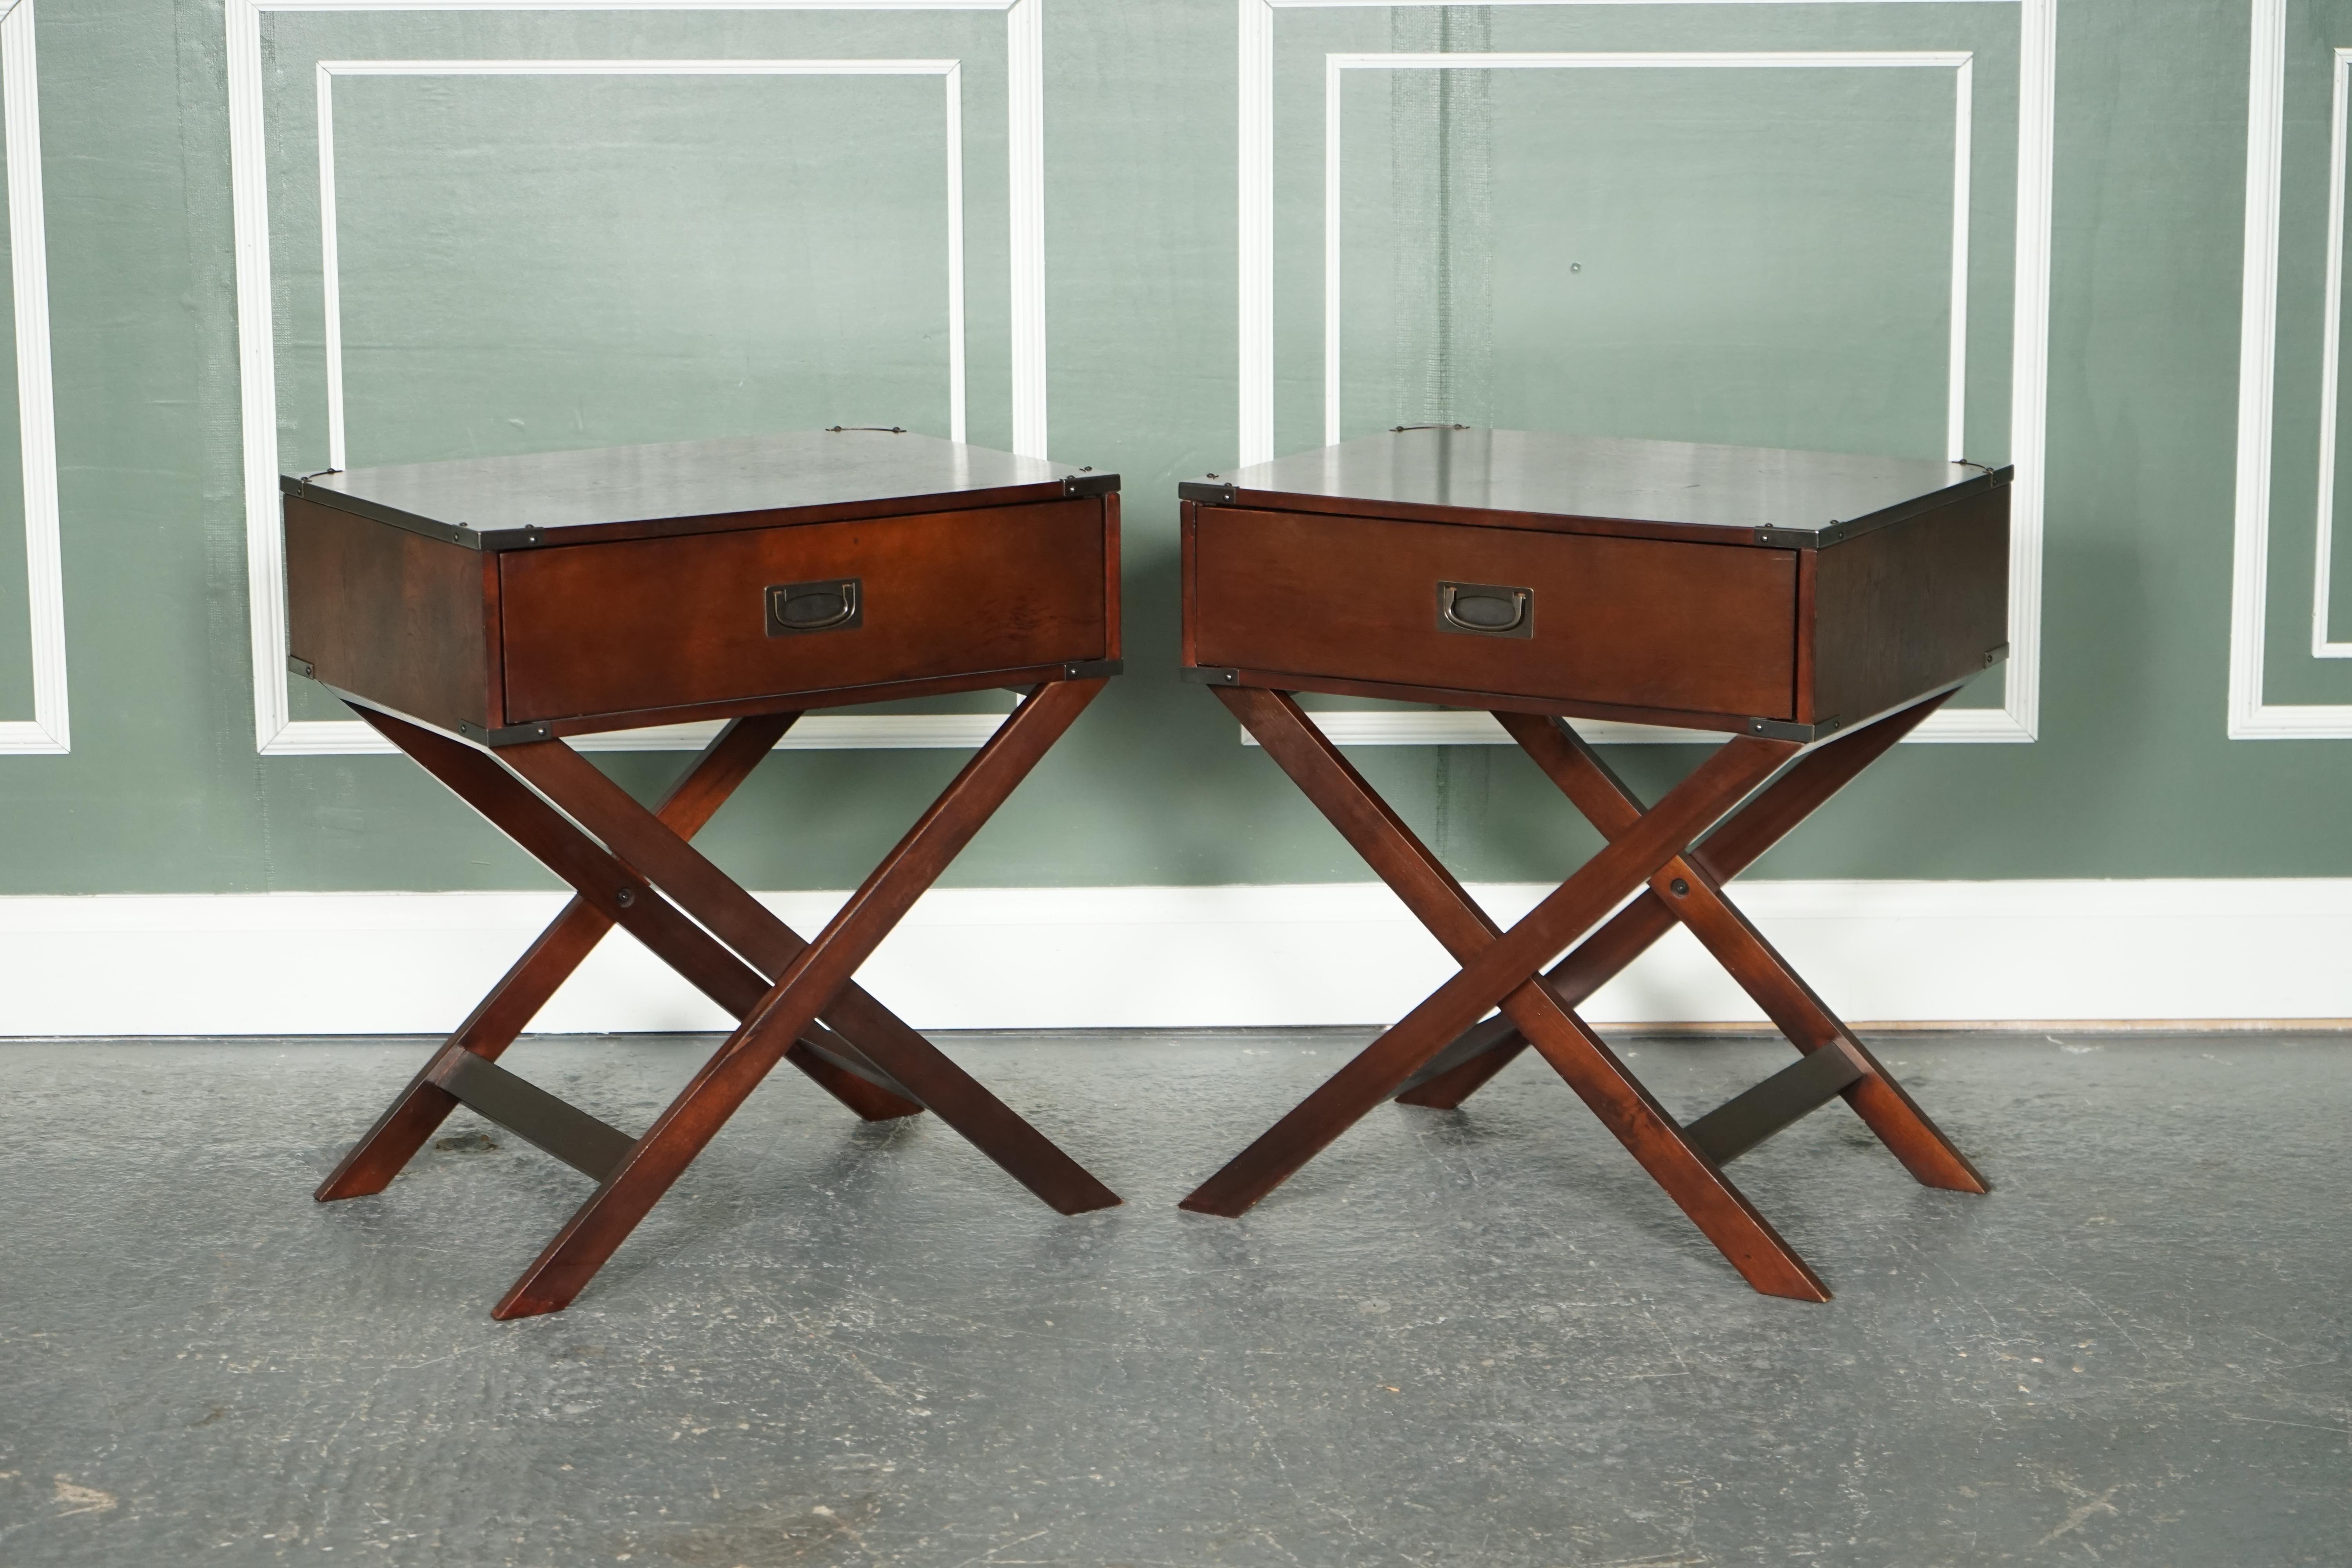 We are excited to present this vintage pair of military campaign-style bedside end tables.

Very good-looking pair raised on x-framed legs.
Campaign handles and brackets around the corners.

We have deep cleaned, stained, hand waxed and hand